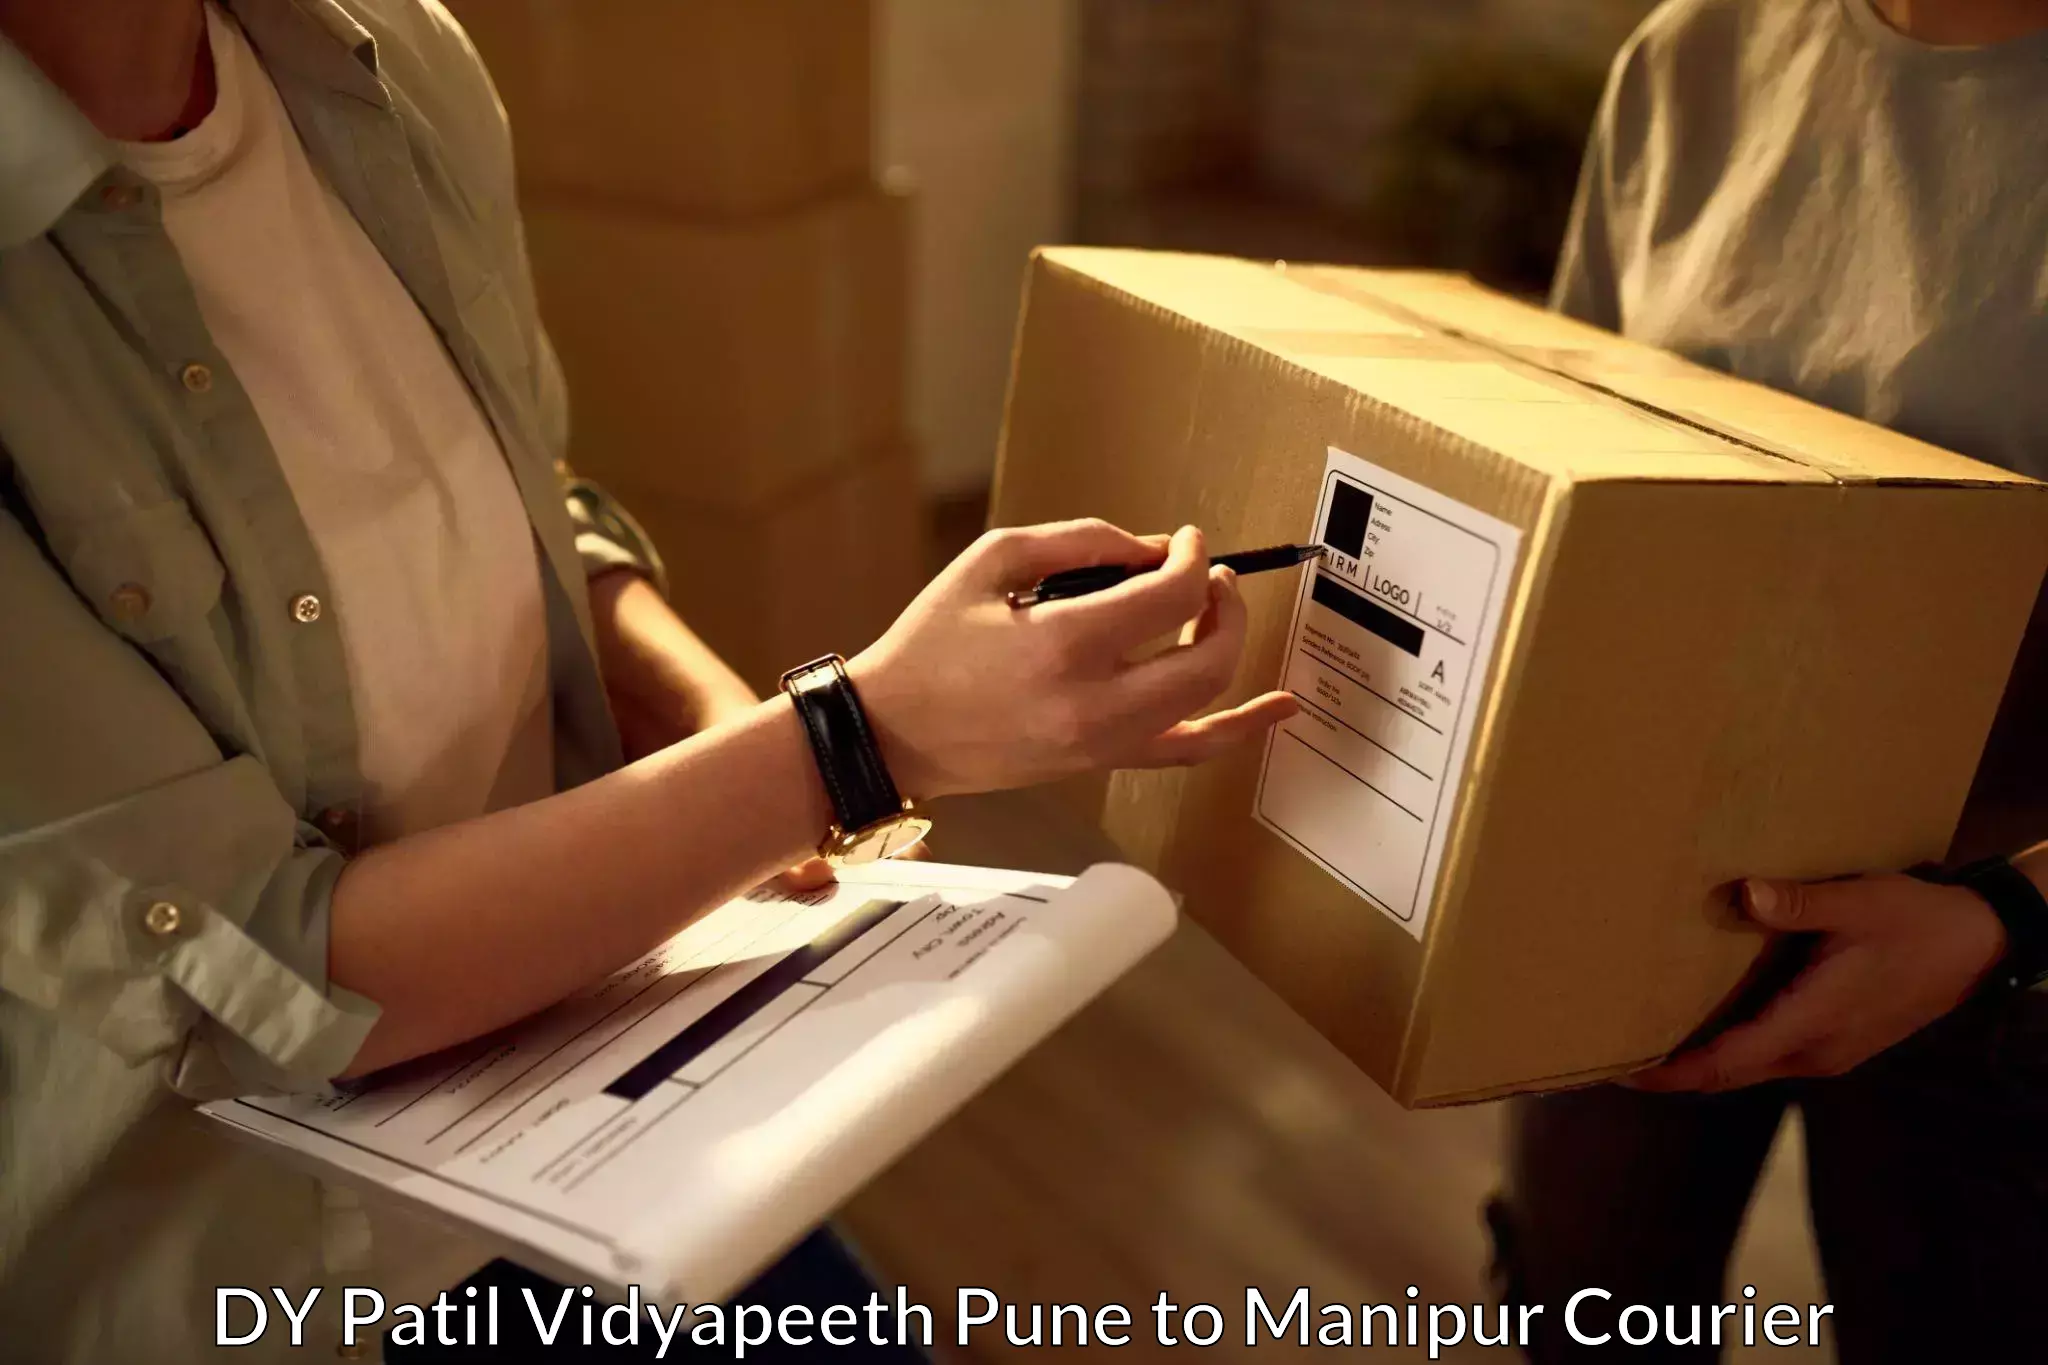 Advanced package delivery DY Patil Vidyapeeth Pune to Manipur